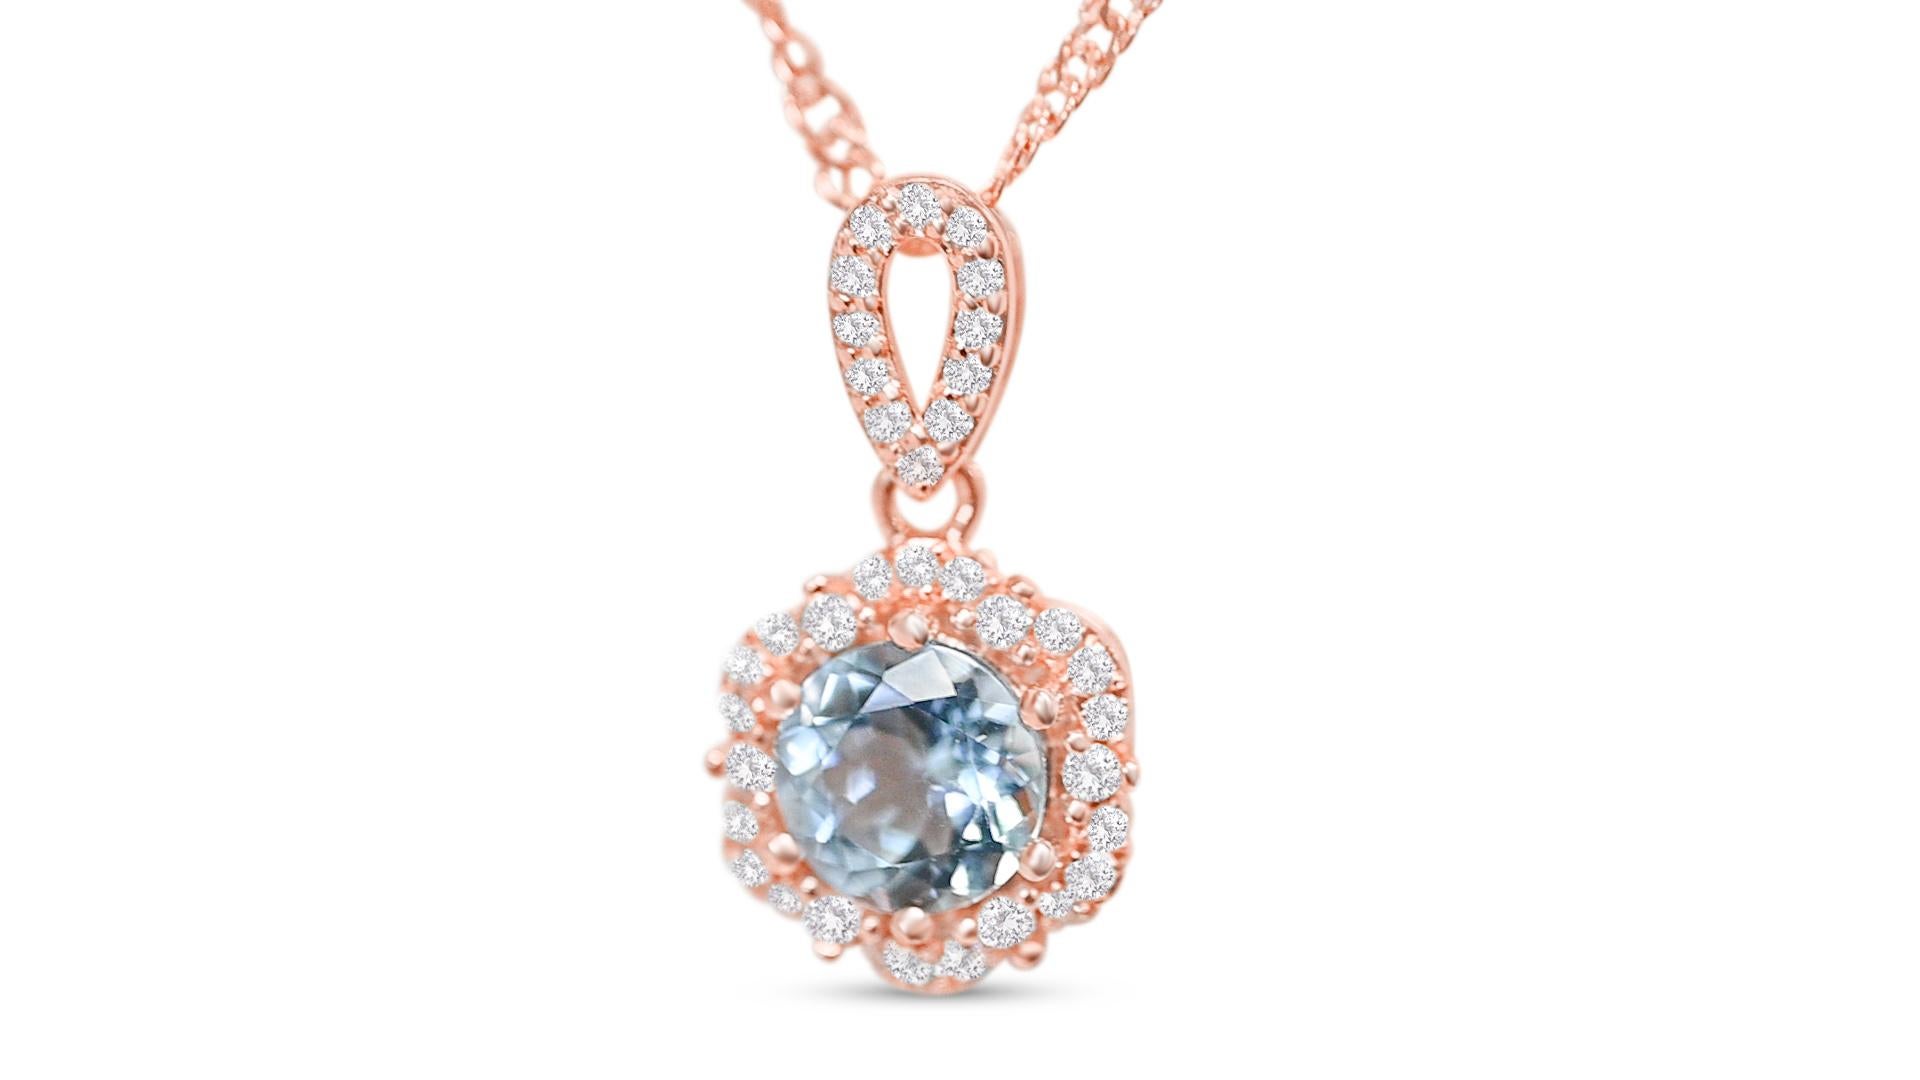 Welcome to Blue Star Gems NY LLC! Discover popular engagement Necklace & Wedding Necklace All designs from classic to vintage inspired. We offer Joyful jewelry for everyday wear. Just for you. We go above and beyond the current industry standards to